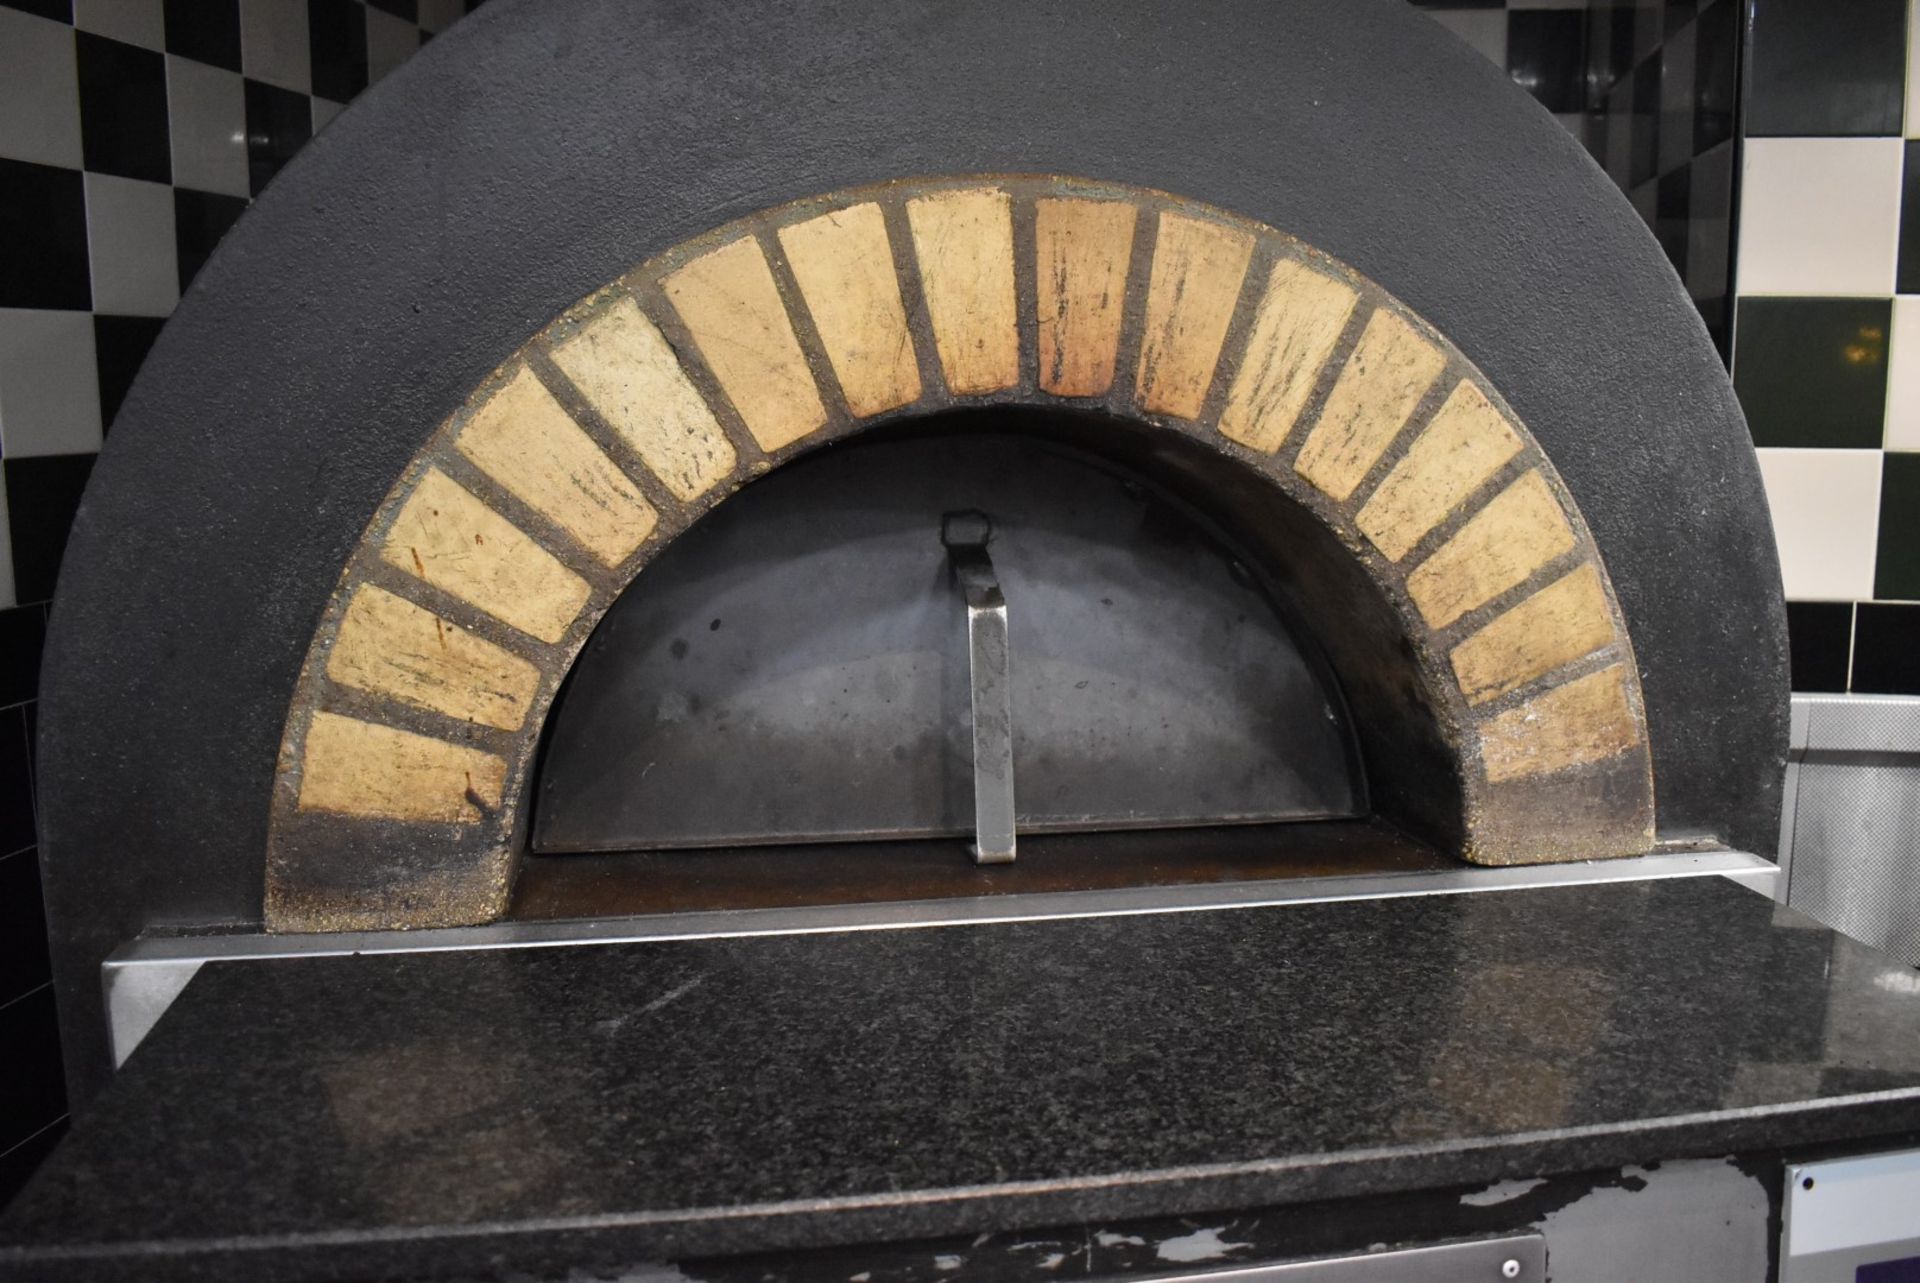 1 x MAM Firedome Commercial Stone Baked Gas Pizza Oven - Made in Italy - Image 11 of 16